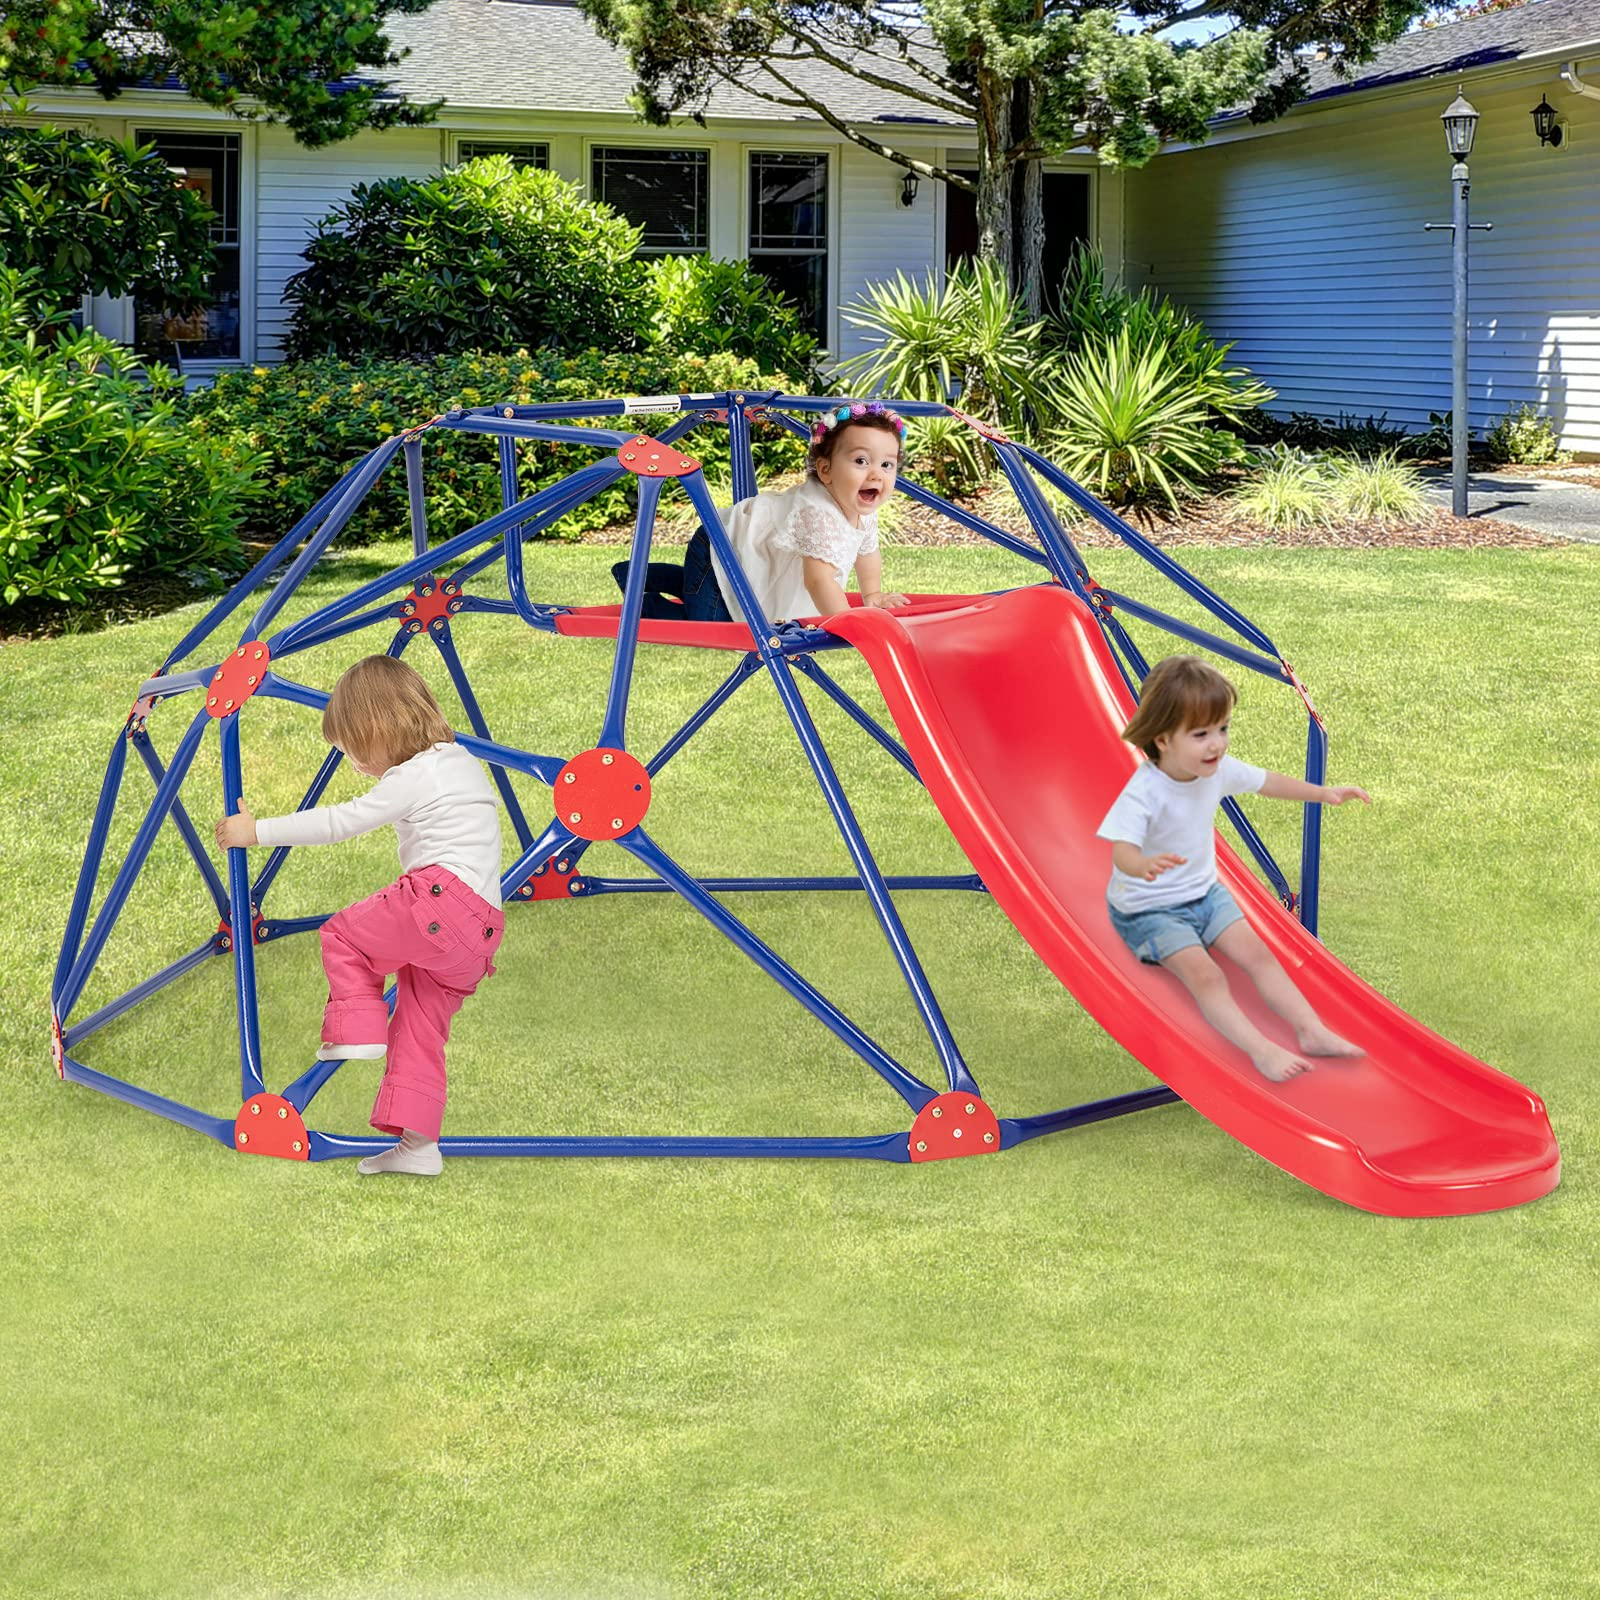 Plastic Geodesic Dome Commercial Playground Climber